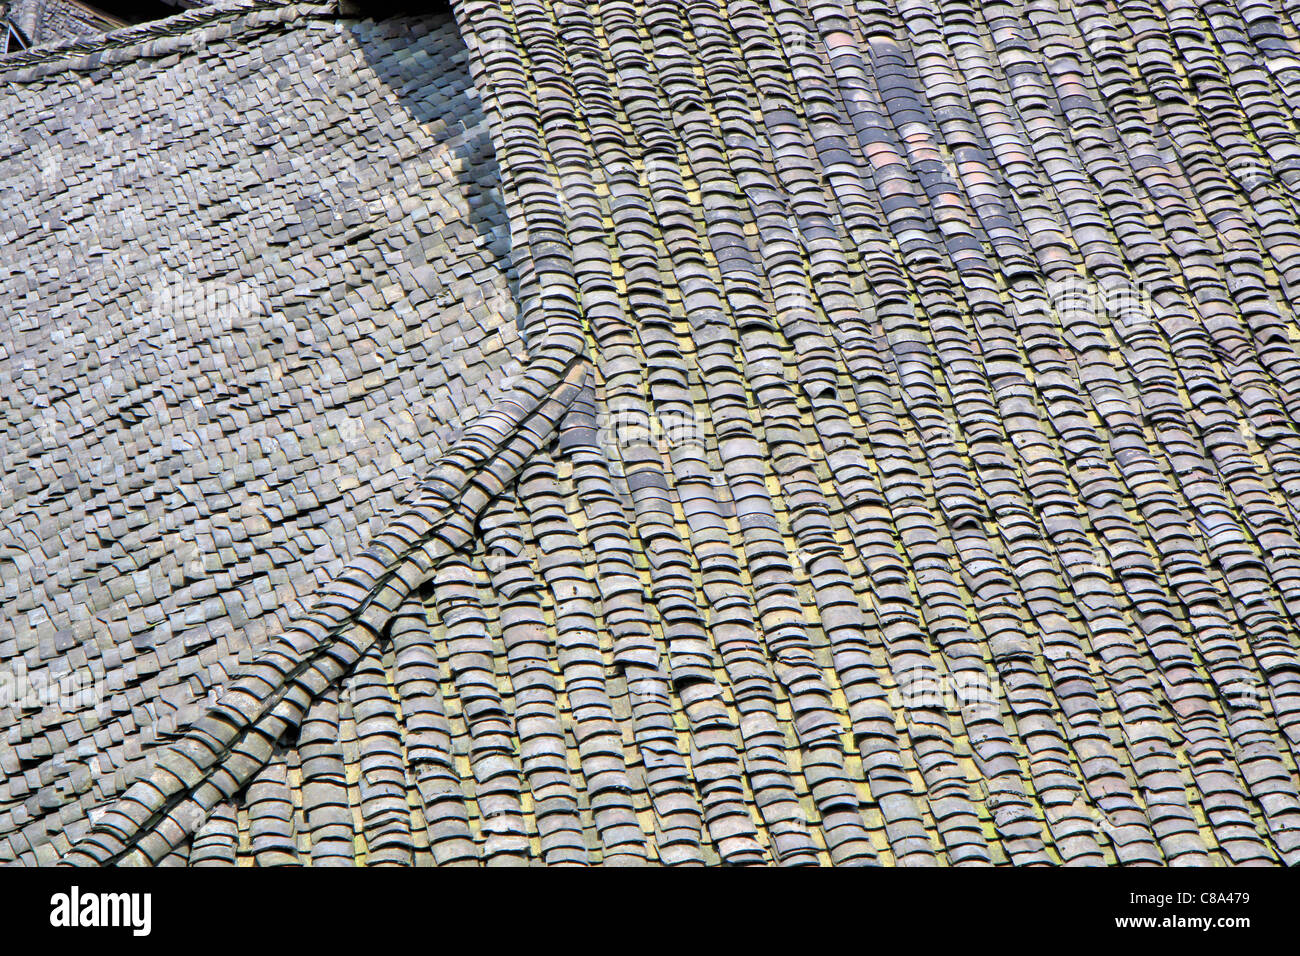 Typical roof made of gray tiles, Ping'an, Guanxi, China Stock Photo